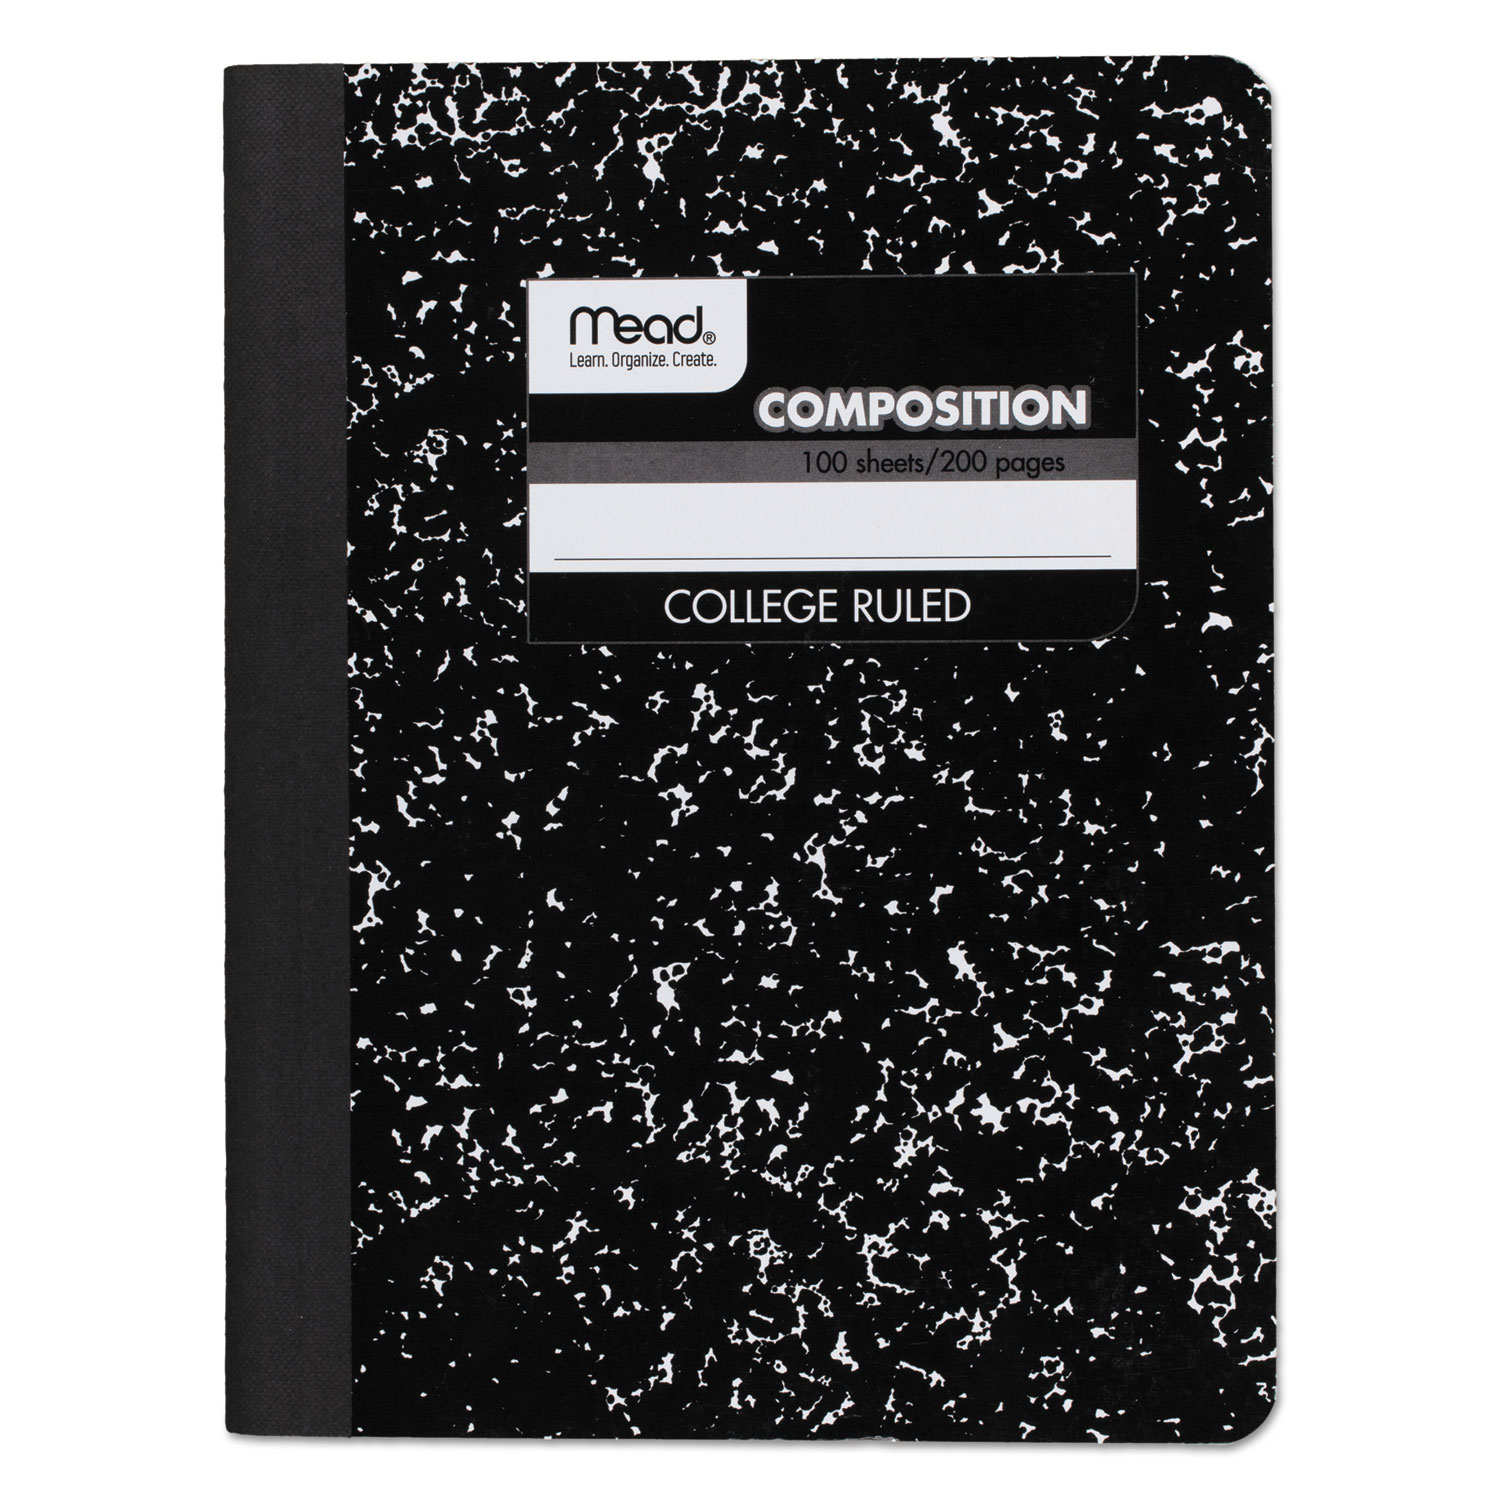  Mead 09932 Square Deal Composition Book, Medium/College Rule, Black Cover, 9.75 x 7.5, 100 Sheets (MEA09932) 